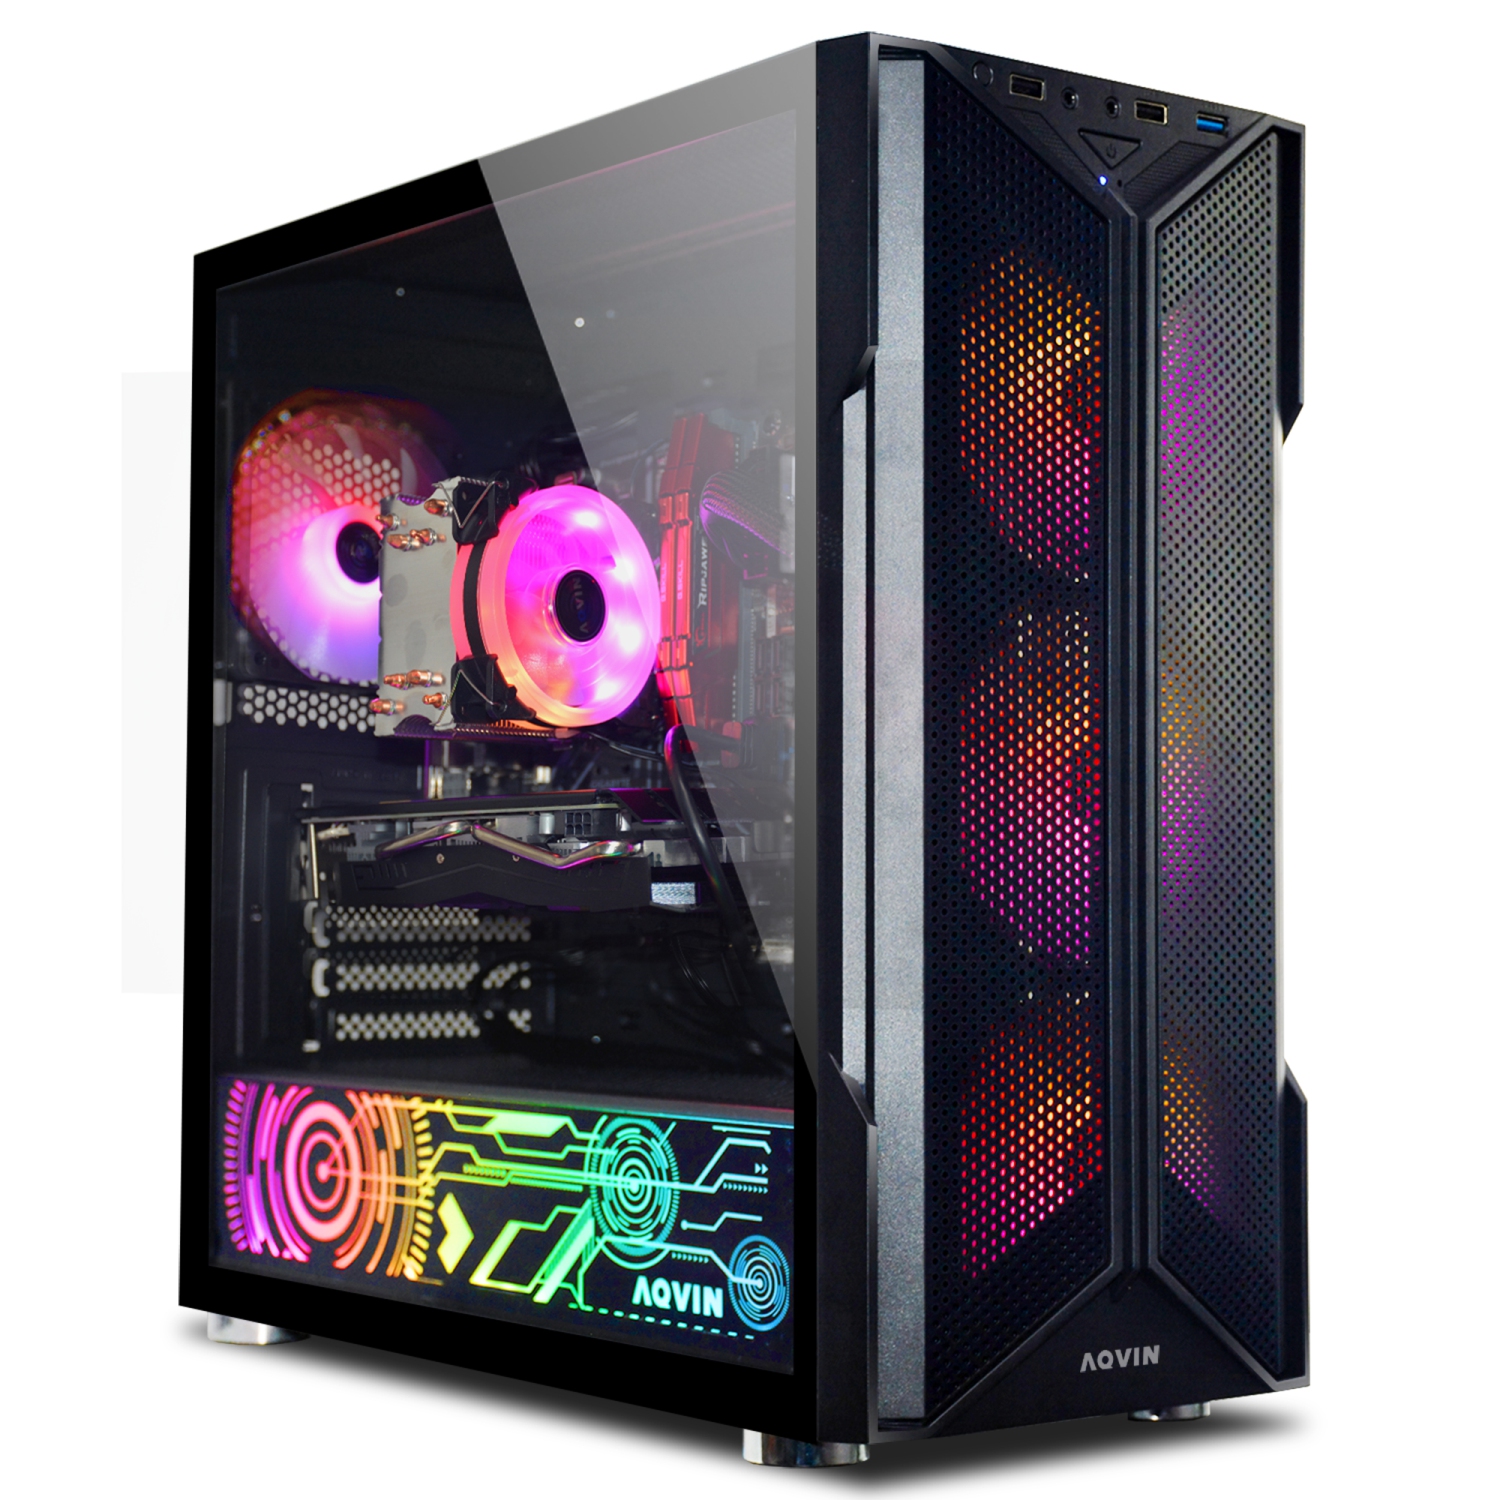 Gaming PC AQVIN-AQ20 Desktop Computer Tower - RGB (Intel Core i7 up to 4.60 GHz/ 2TB SSD/ 32GB DDR4 RAM/ GeForce RTX 3060 12GB/ Windows 11) - Only at Best Buy